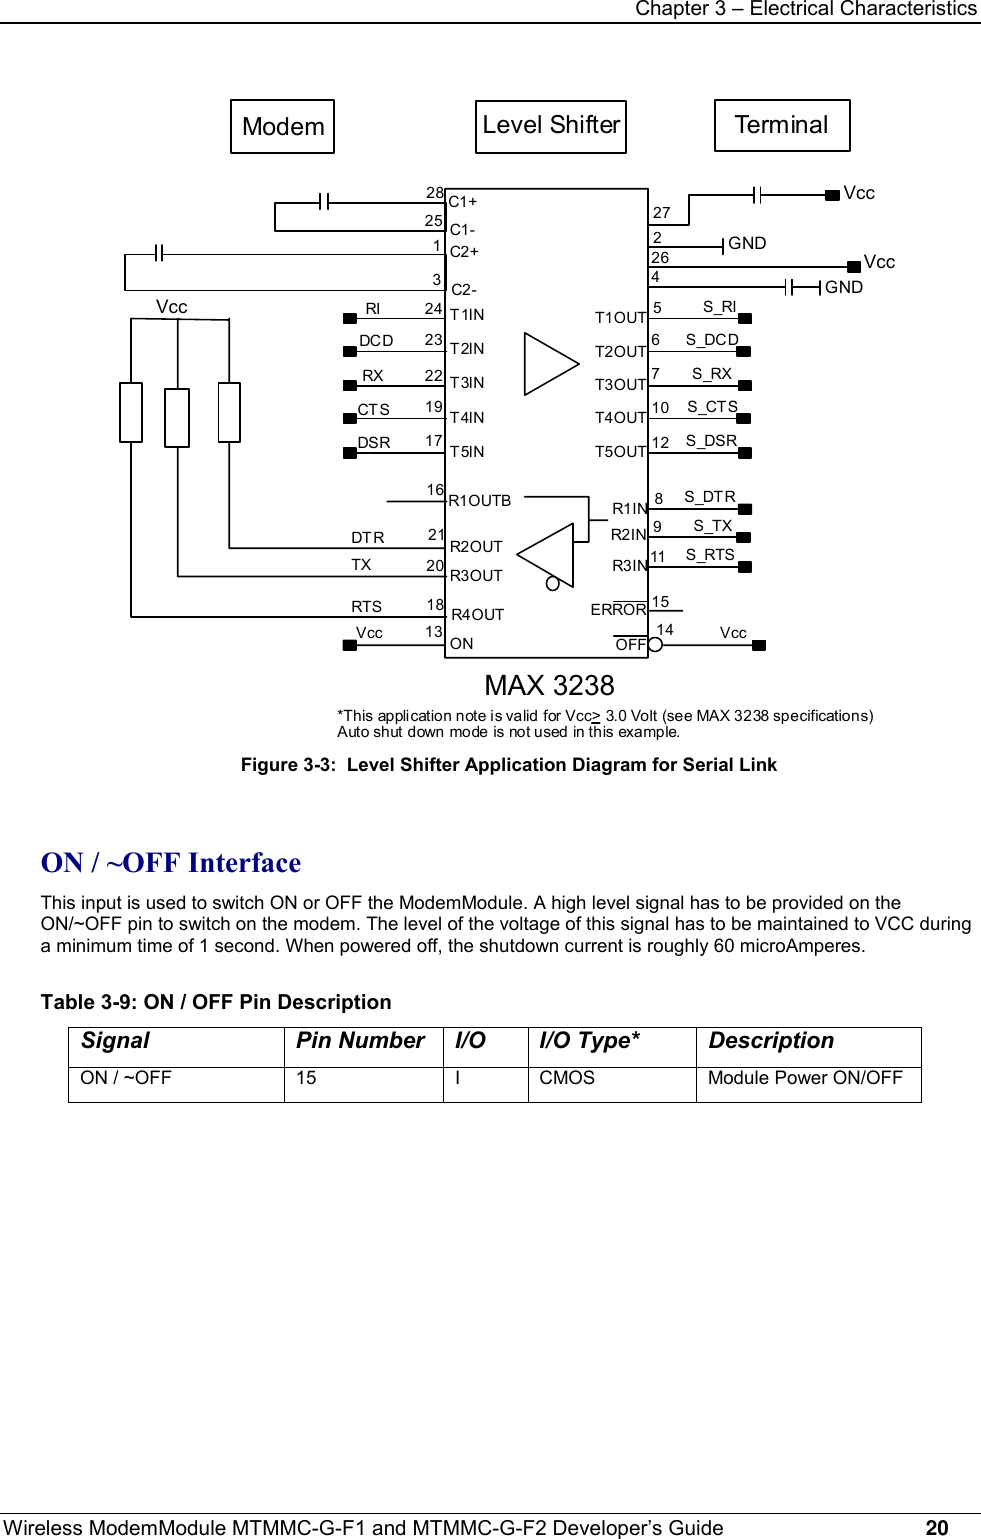 Chapter 3 – Electrical CharacteristicsWireless ModemModule MTMMC-G-F1 and MTMMC-G-F2 Developer’s Guide     20Modem Te rm in a lLevel ShifterVccRIDCDRXCTSDSRDTRTXRTSVcc28251324232219171621201813C1+C1-C2+T1INT2INT3INT4INT5INR1OUTBR2OUTR3OUTR4OUTONC2-T1OUTT2OUTT3OUTT4OUTT5OUTR1INR2INR3INERROROFF272264567101289111514S_RIS_DCDS_RXS_CTSS_DSRS_DTRS_TXS_RTSVccVccGNDVccGNDMAX 3238*Th is appli cation n ote i s valid for Vcc&gt; 3.0 Volt (see MAX 3 238  sp ecification s)Auto shut d own mode is no t used  in th is exa mp le.Figure 3-3:  Level Shifter Application Diagram for Serial LinkON / ~OFF InterfaceThis input is used to switch ON or OFF the ModemModule. A high level signal has to be provided on theON/~OFF pin to switch on the modem. The level of the voltage of this signal has to be maintained to VCC duringa minimum time of 1 second. When powered off, the shutdown current is roughly 60 microAmperes.Table 3-9: ON / OFF Pin DescriptionSignal Pin Number I/O I/O Type* DescriptionON / ~OFF 15 I CMOS Module Power ON/OFF